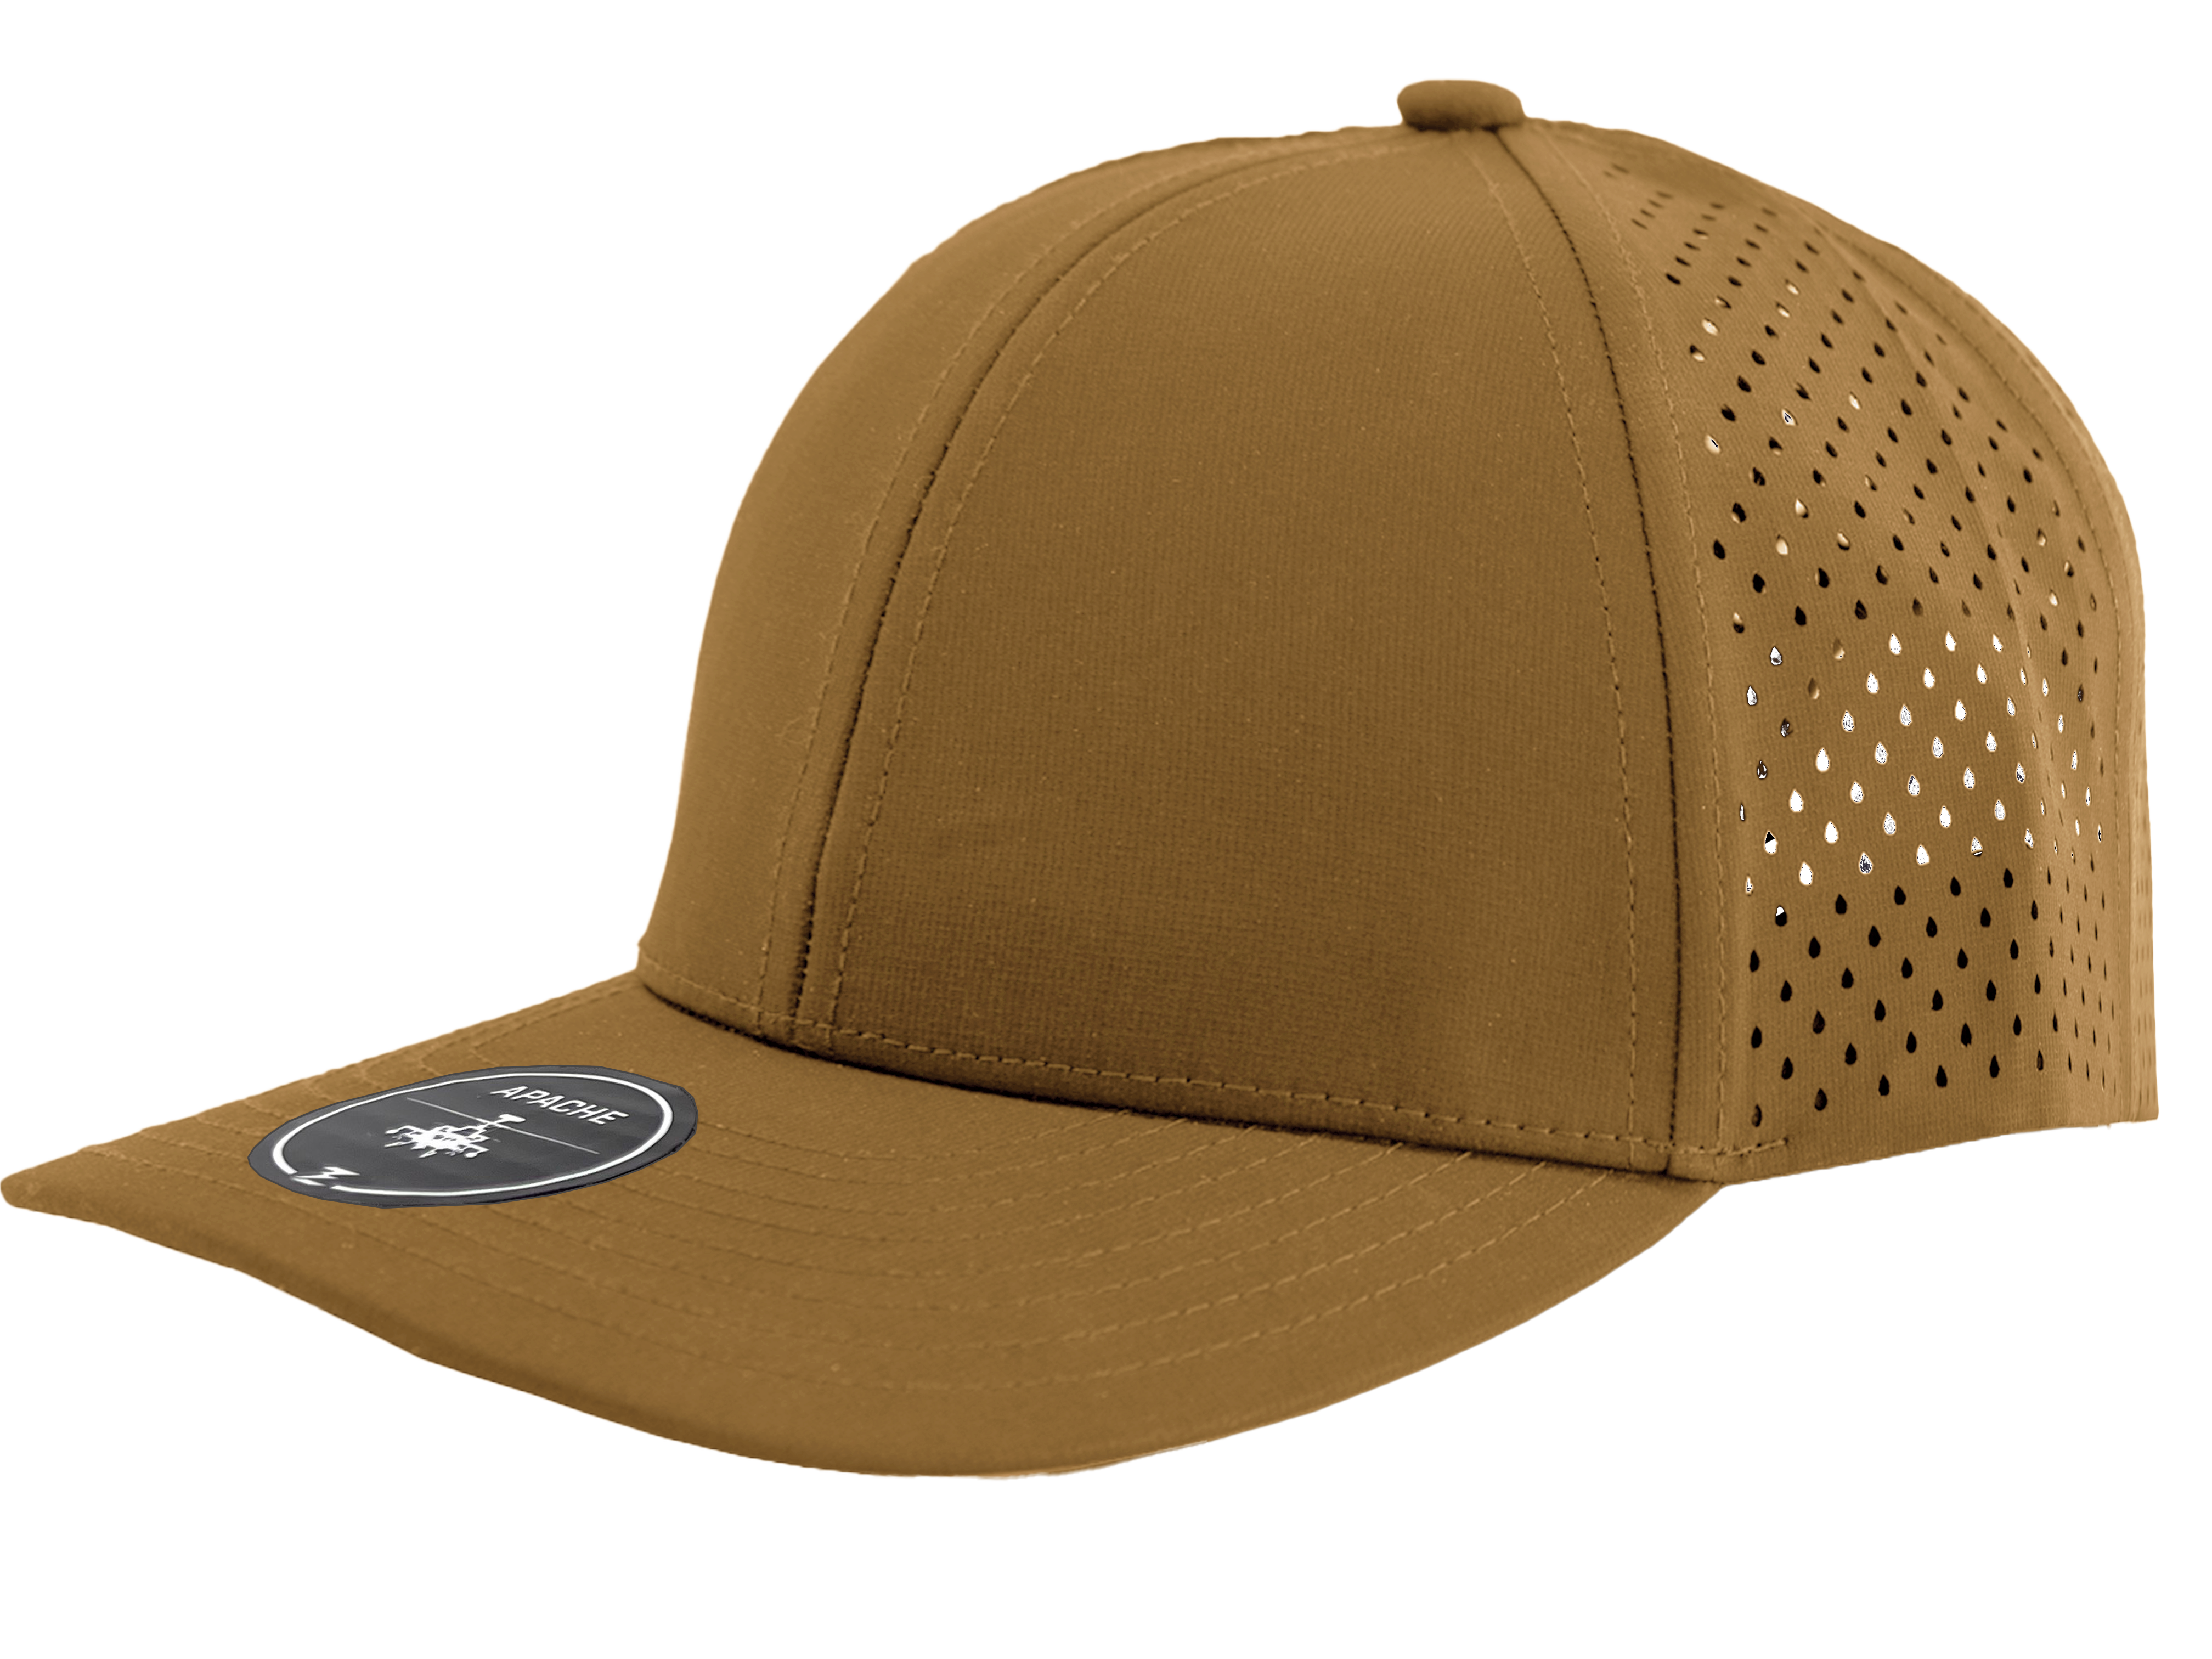 caramel apache perforated side view hat